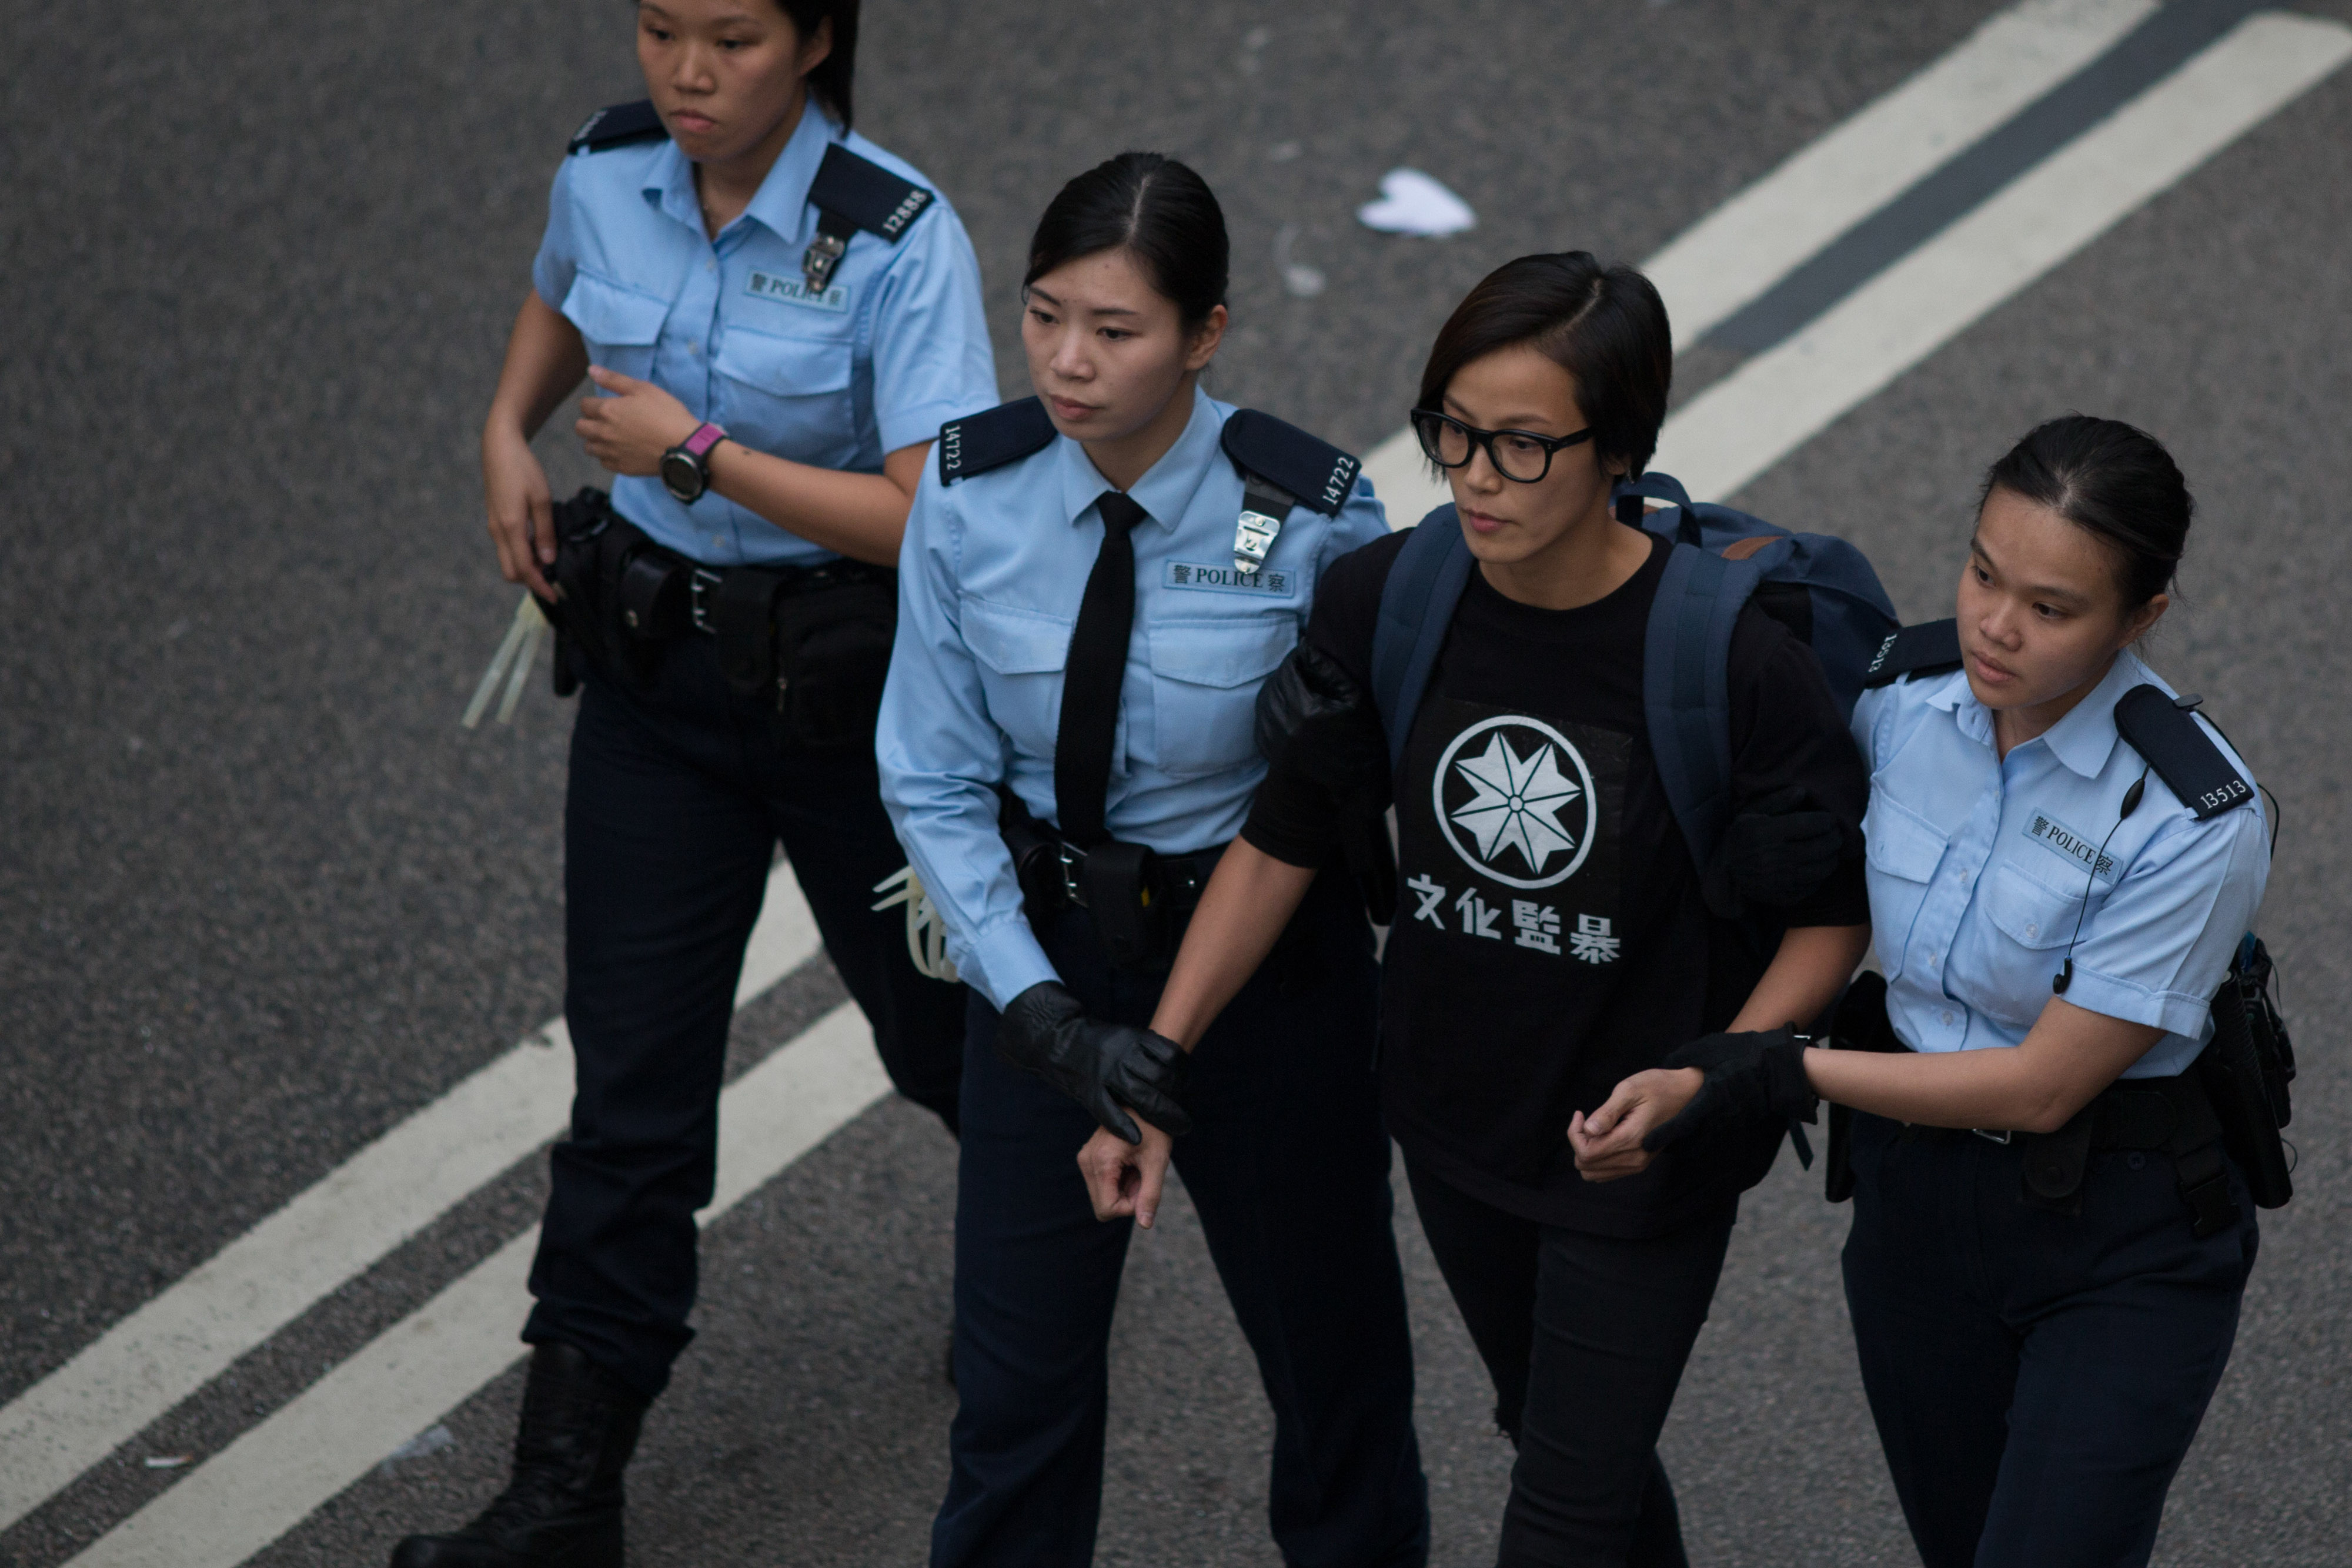 Popular singer Denise Ho is escorted by police officers near the Central Government Offices in the Admiralty district of Hong Kong on Dec. 11, 2014 (Bloomberg/Getty Images)